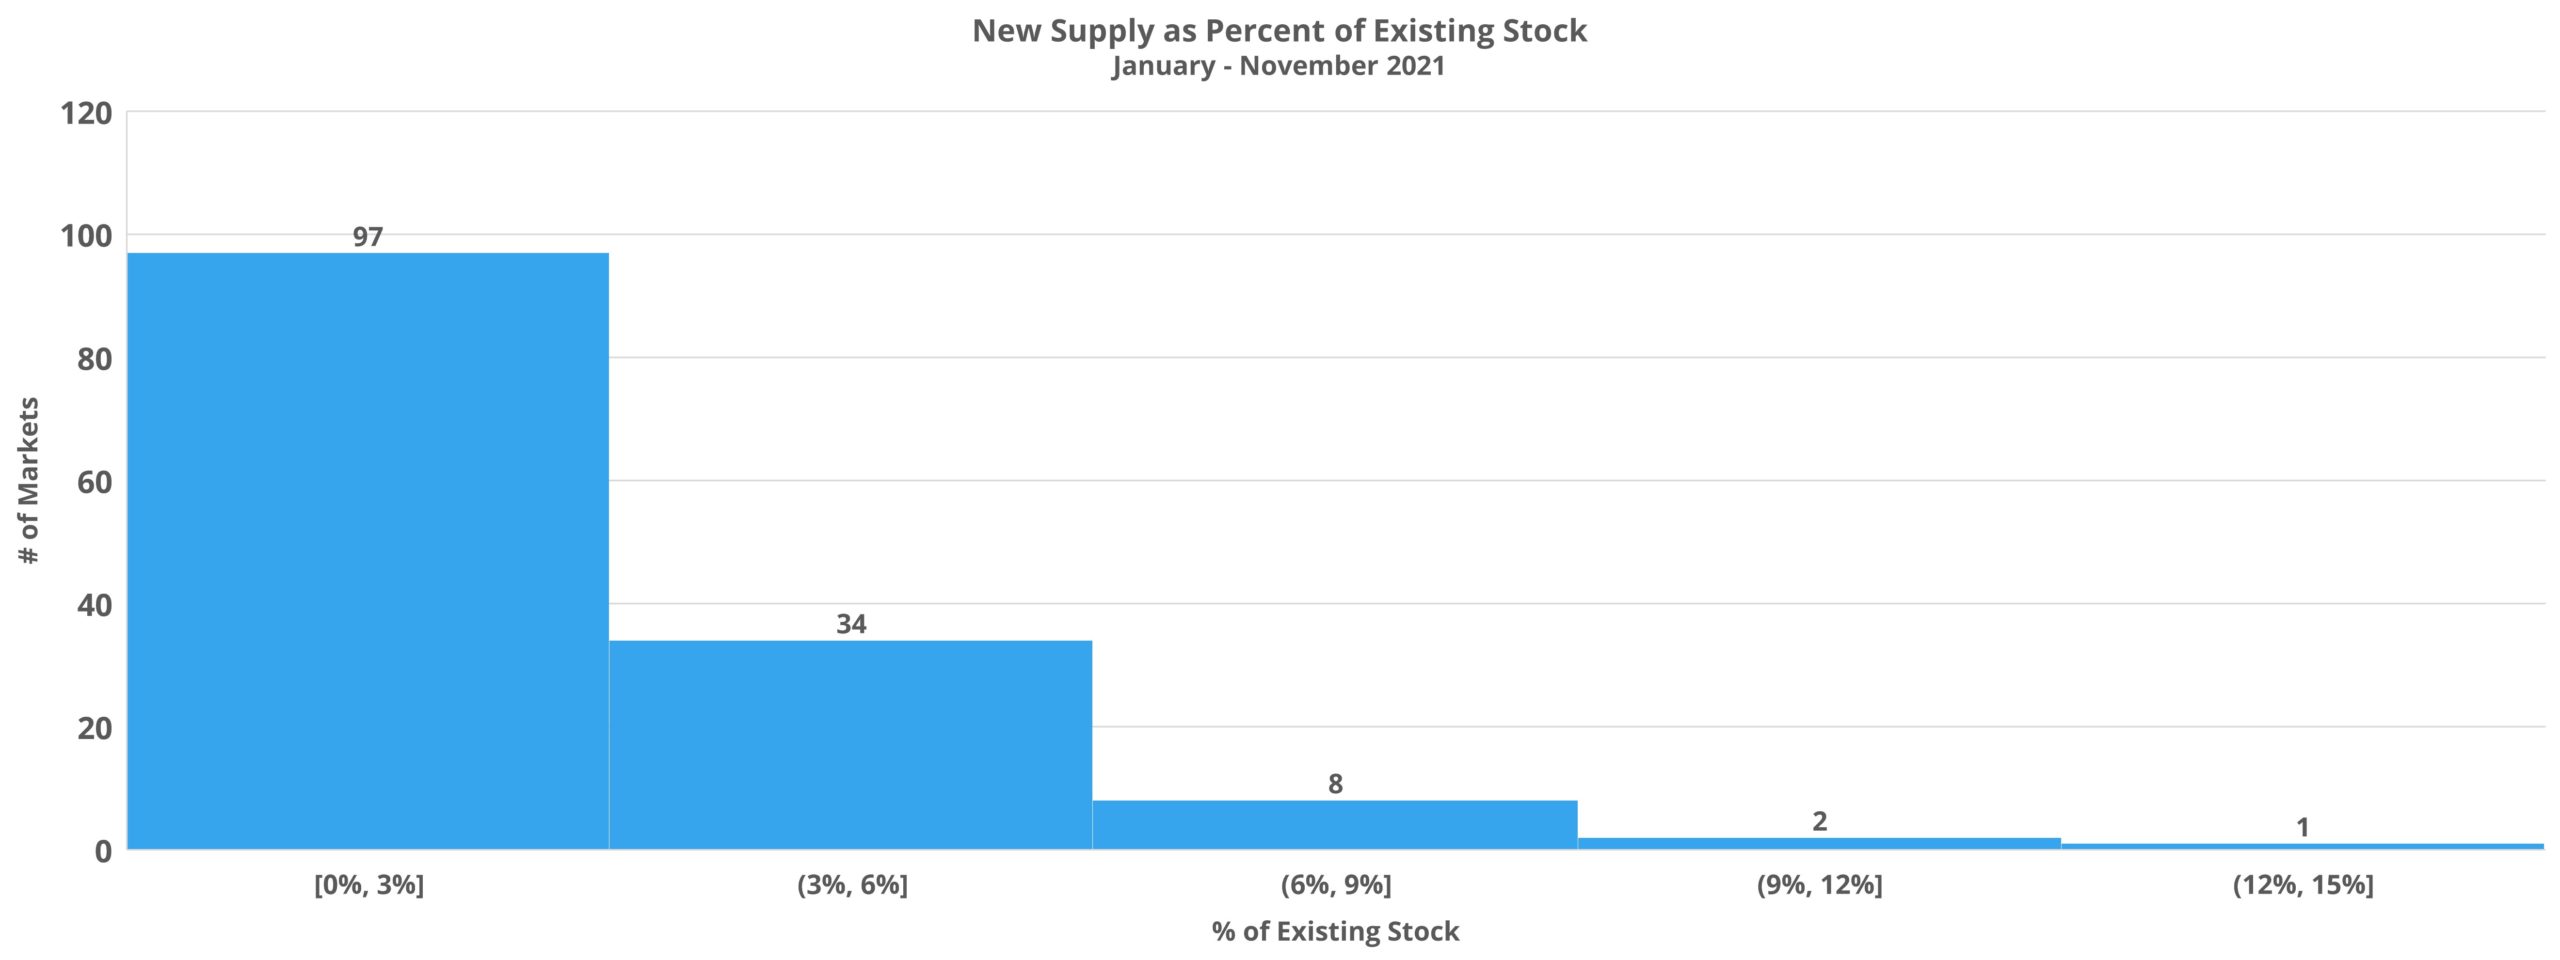 New Supply as Percent of Existing Stock